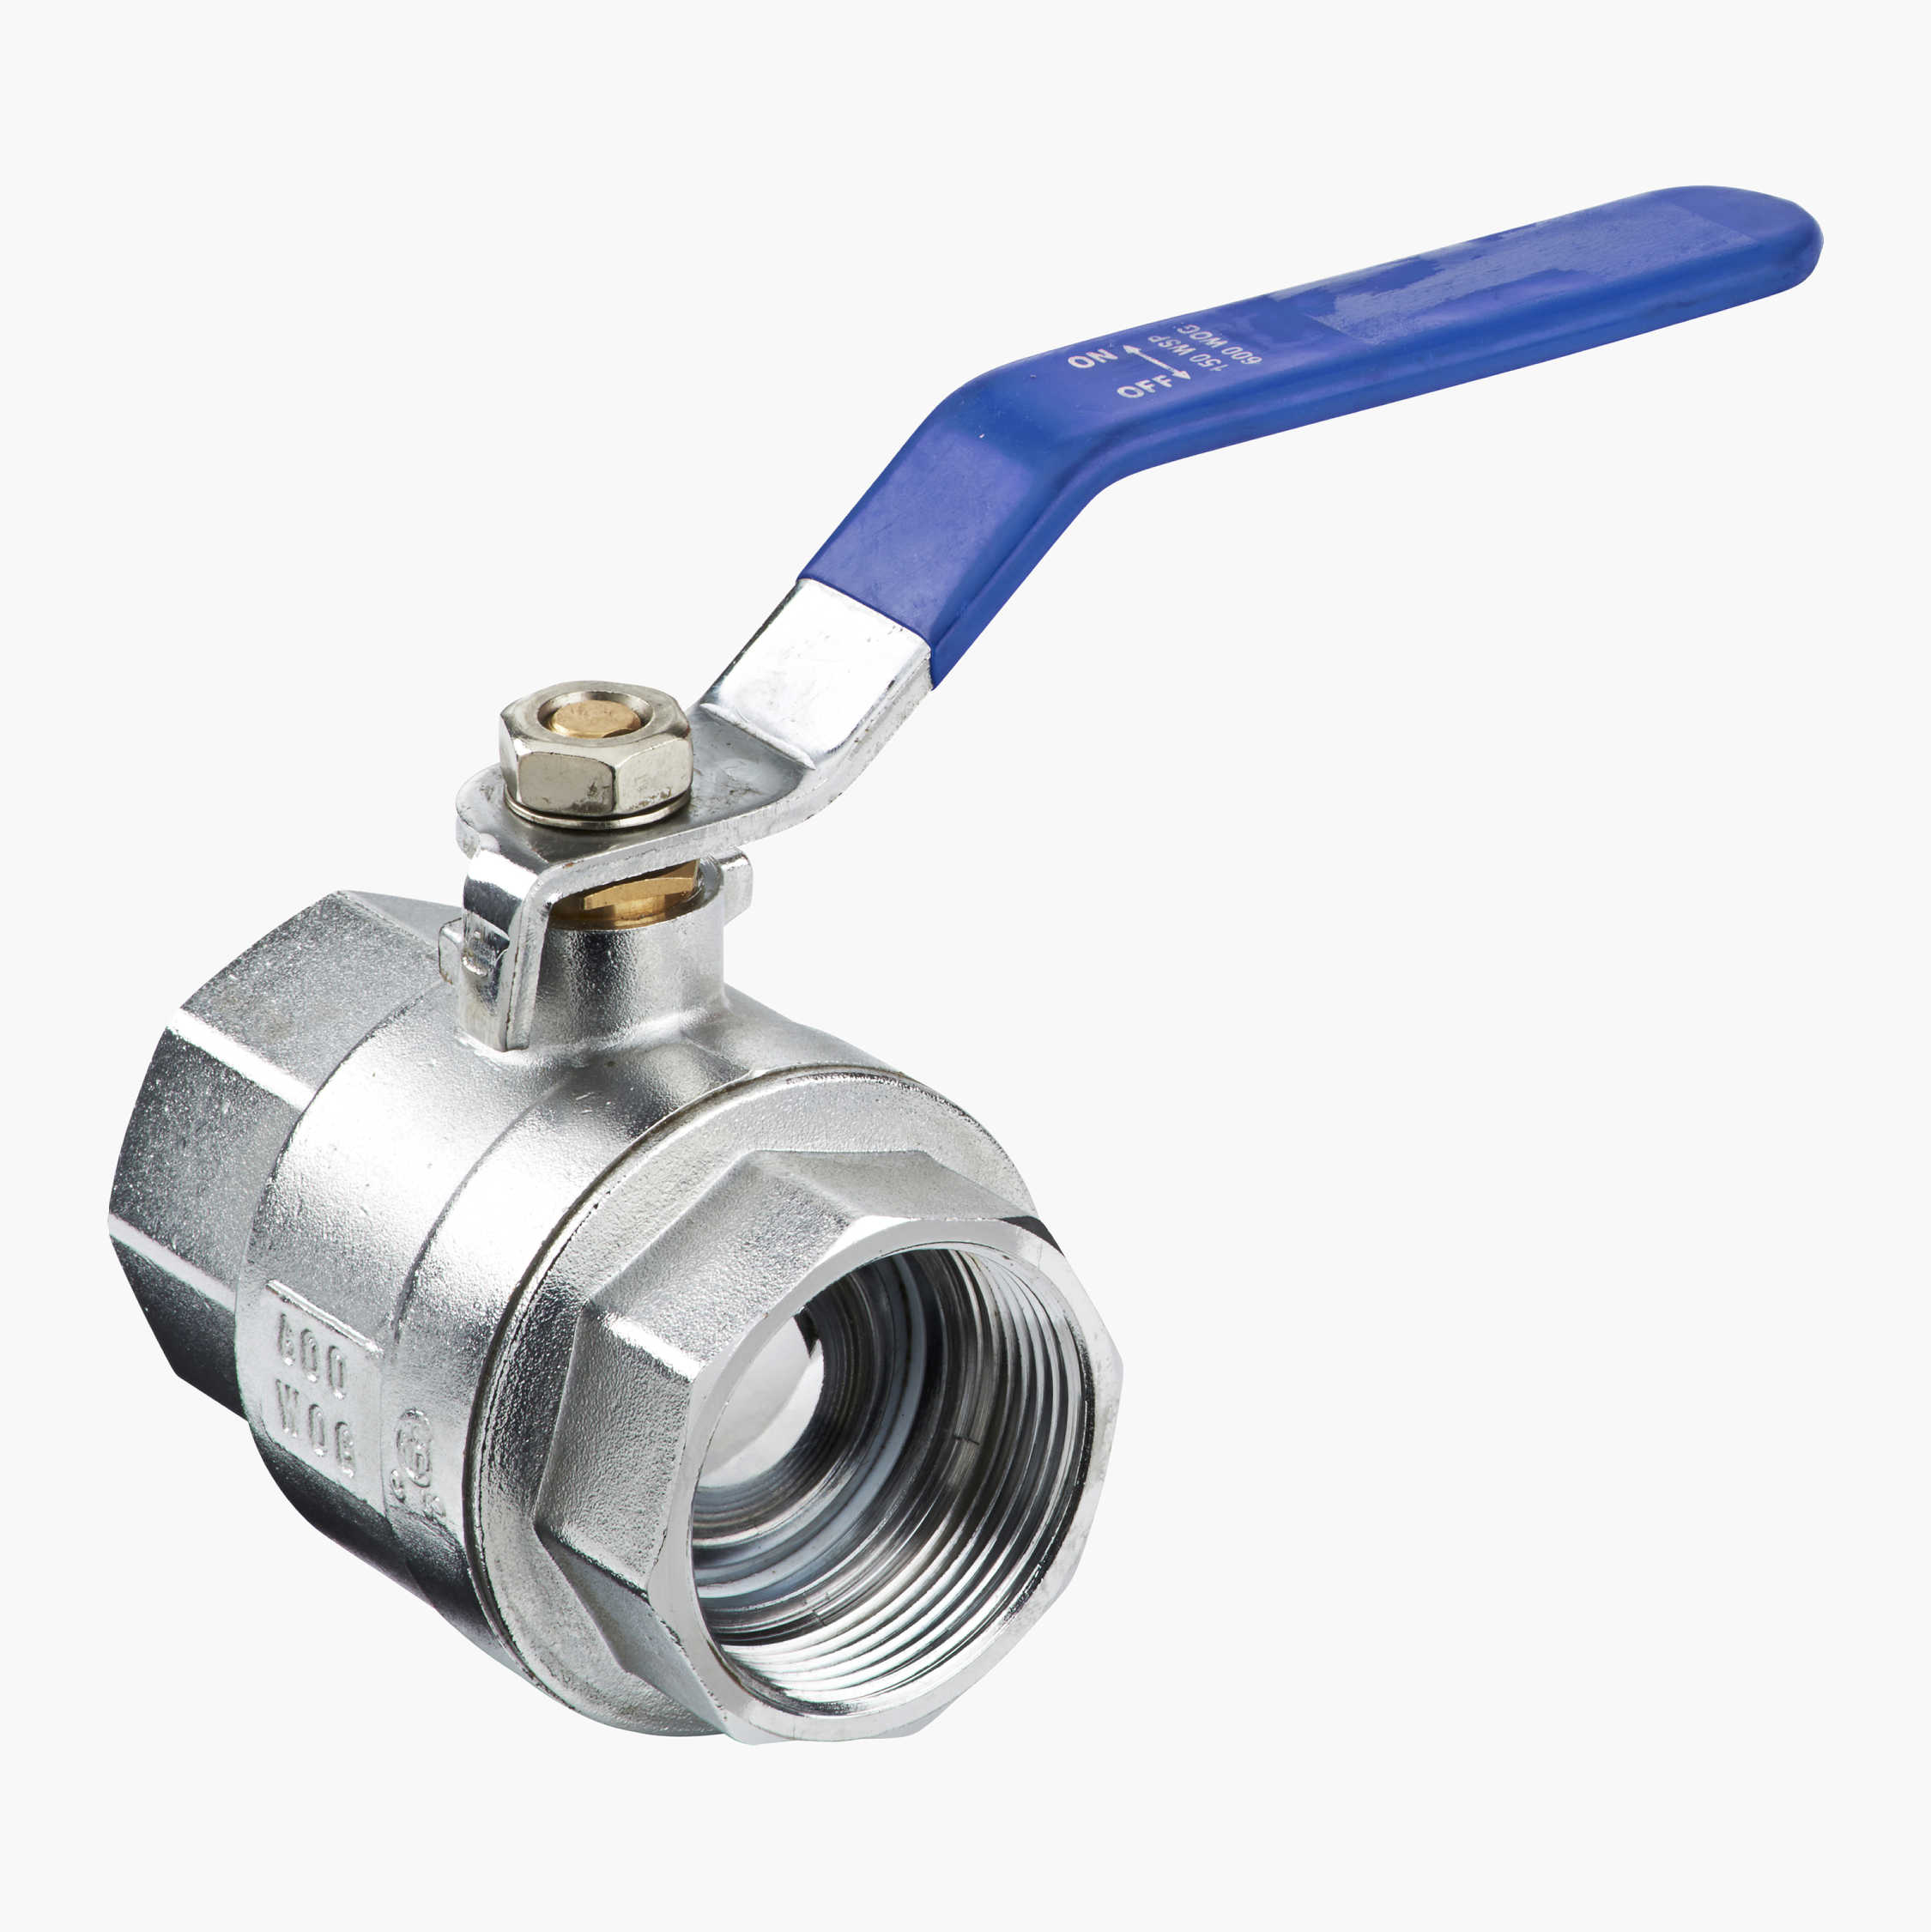 STAINLESS STEEL 316 LEVER BALL VALVE 1 PIECE 1/4" To 2" BSP TAPER THREAD 